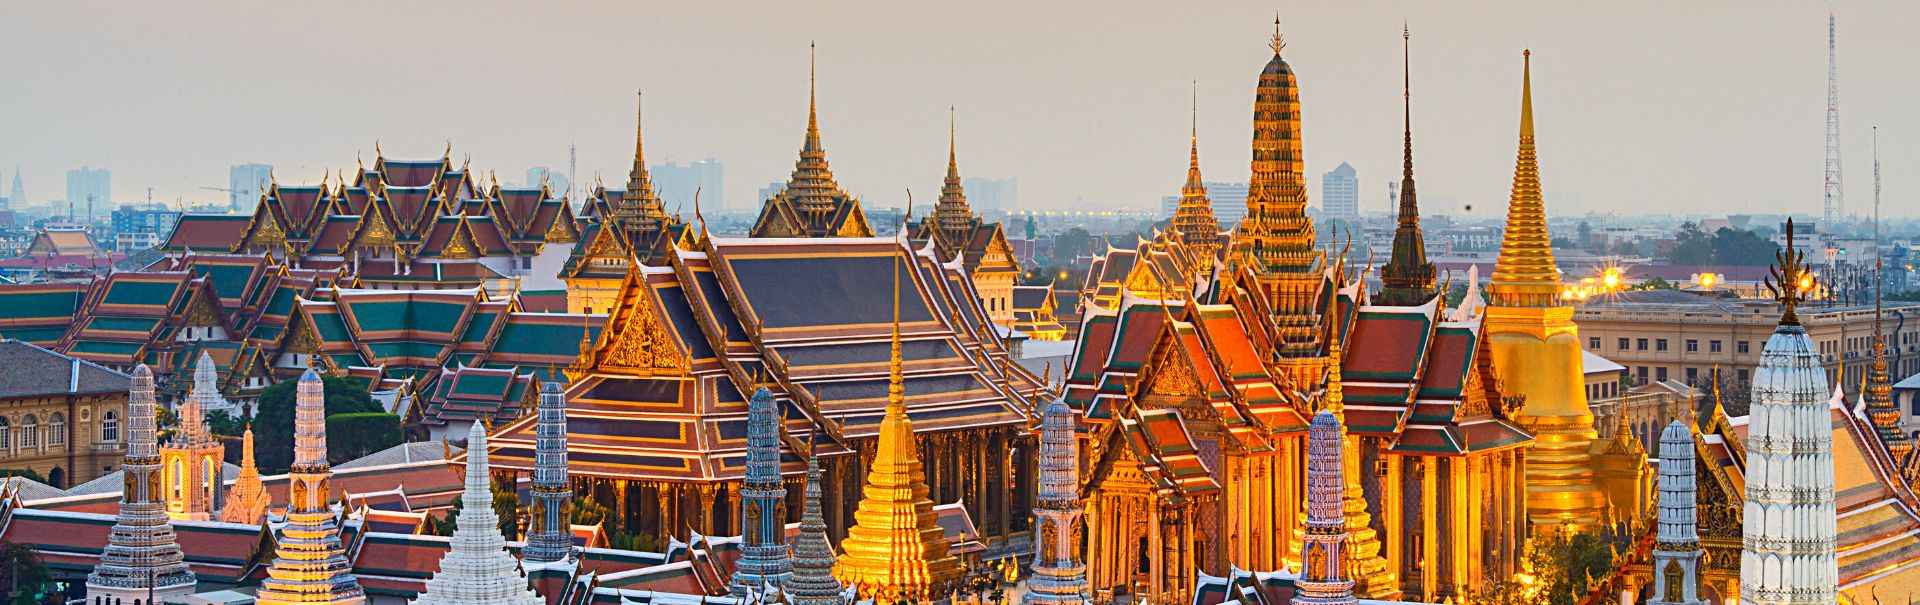 Thailand Tour Packages from Delhi